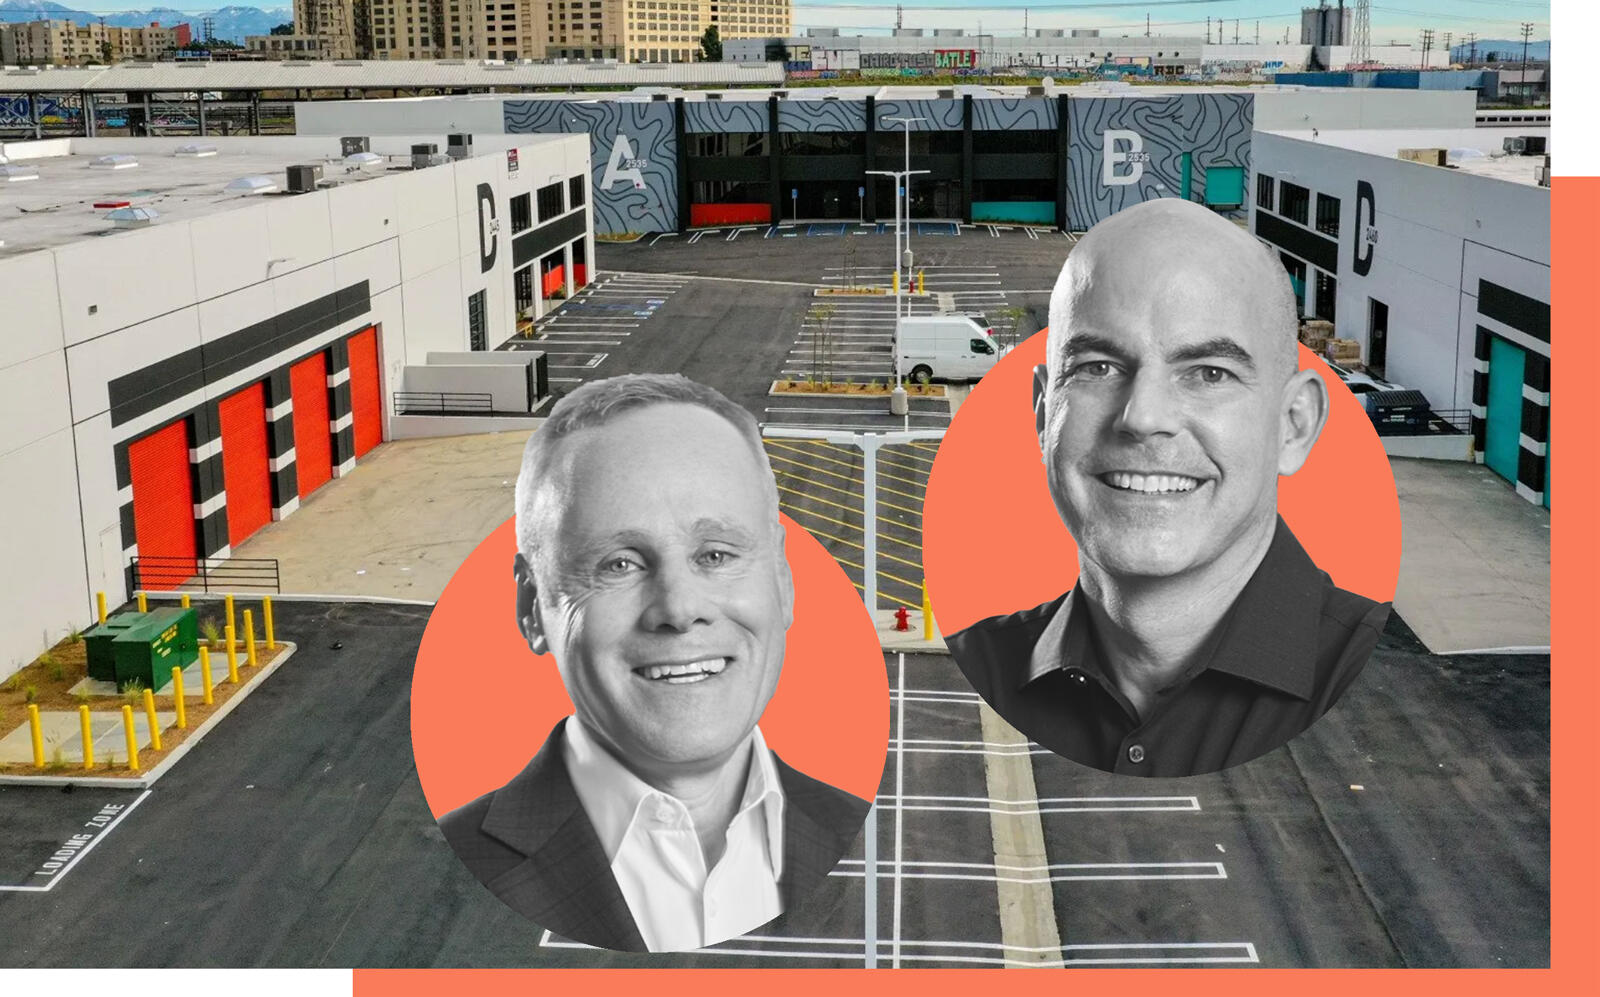 The Box Yard property and Rexford Industrial co-CEOs Howard Schwimmer and Michael Frankel (Box Yard LA. Rexford Industrial)